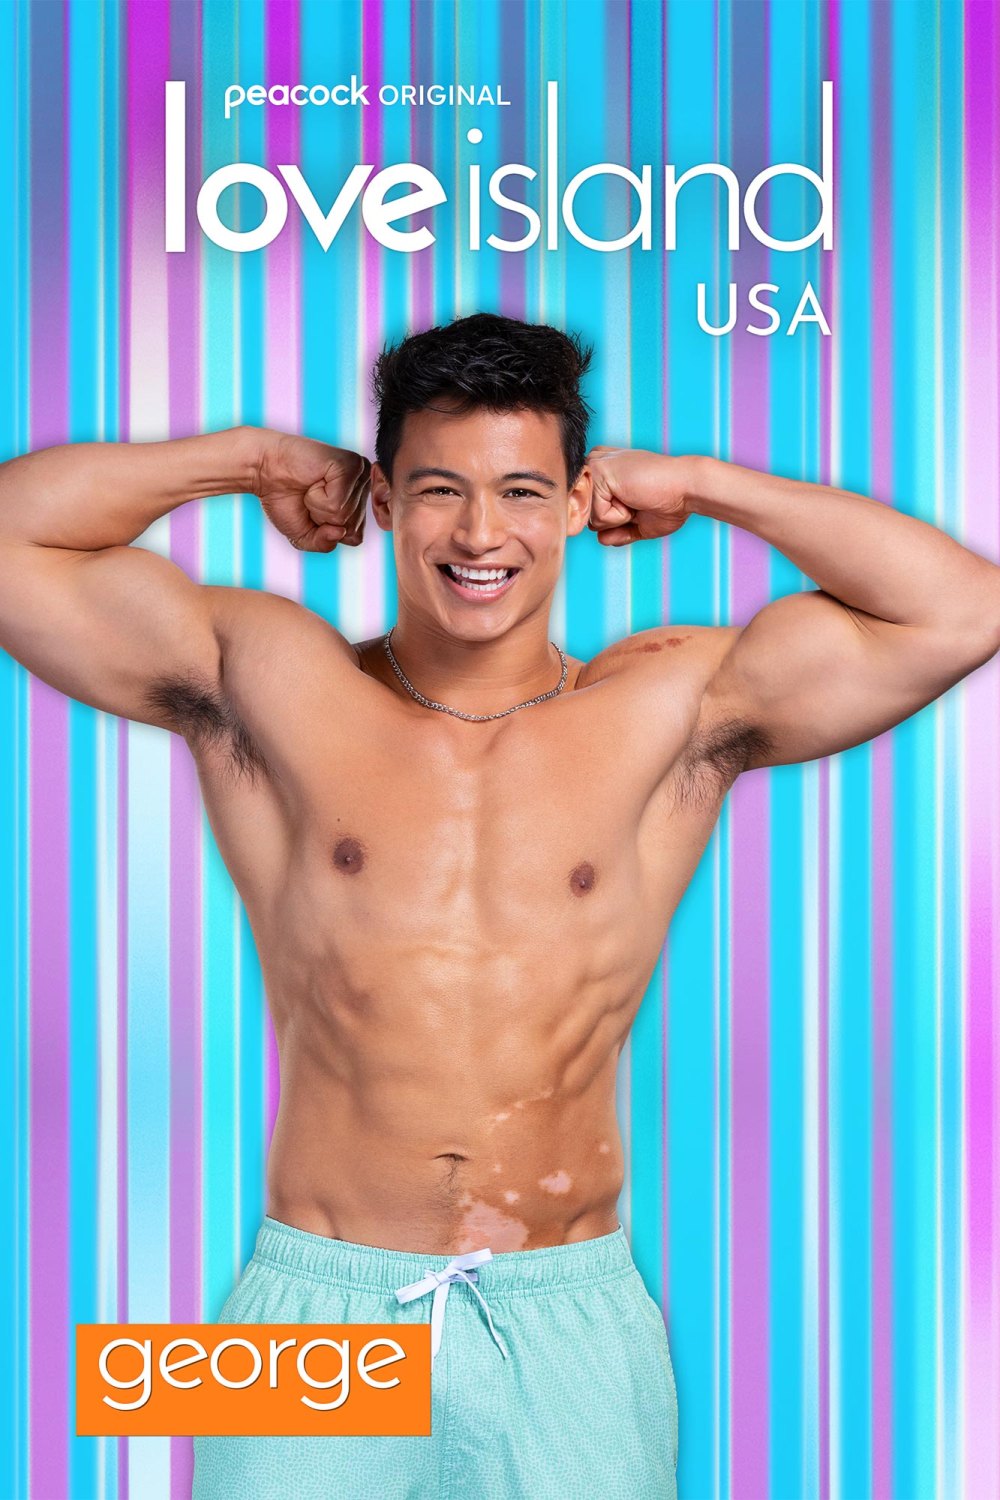 Meet the new Love Island USA Season 6 Bombs Are Coming to Casa Amor LoveIsland_S6_GEORGE_CharacterPortrait_4000x6000_Text_ 131